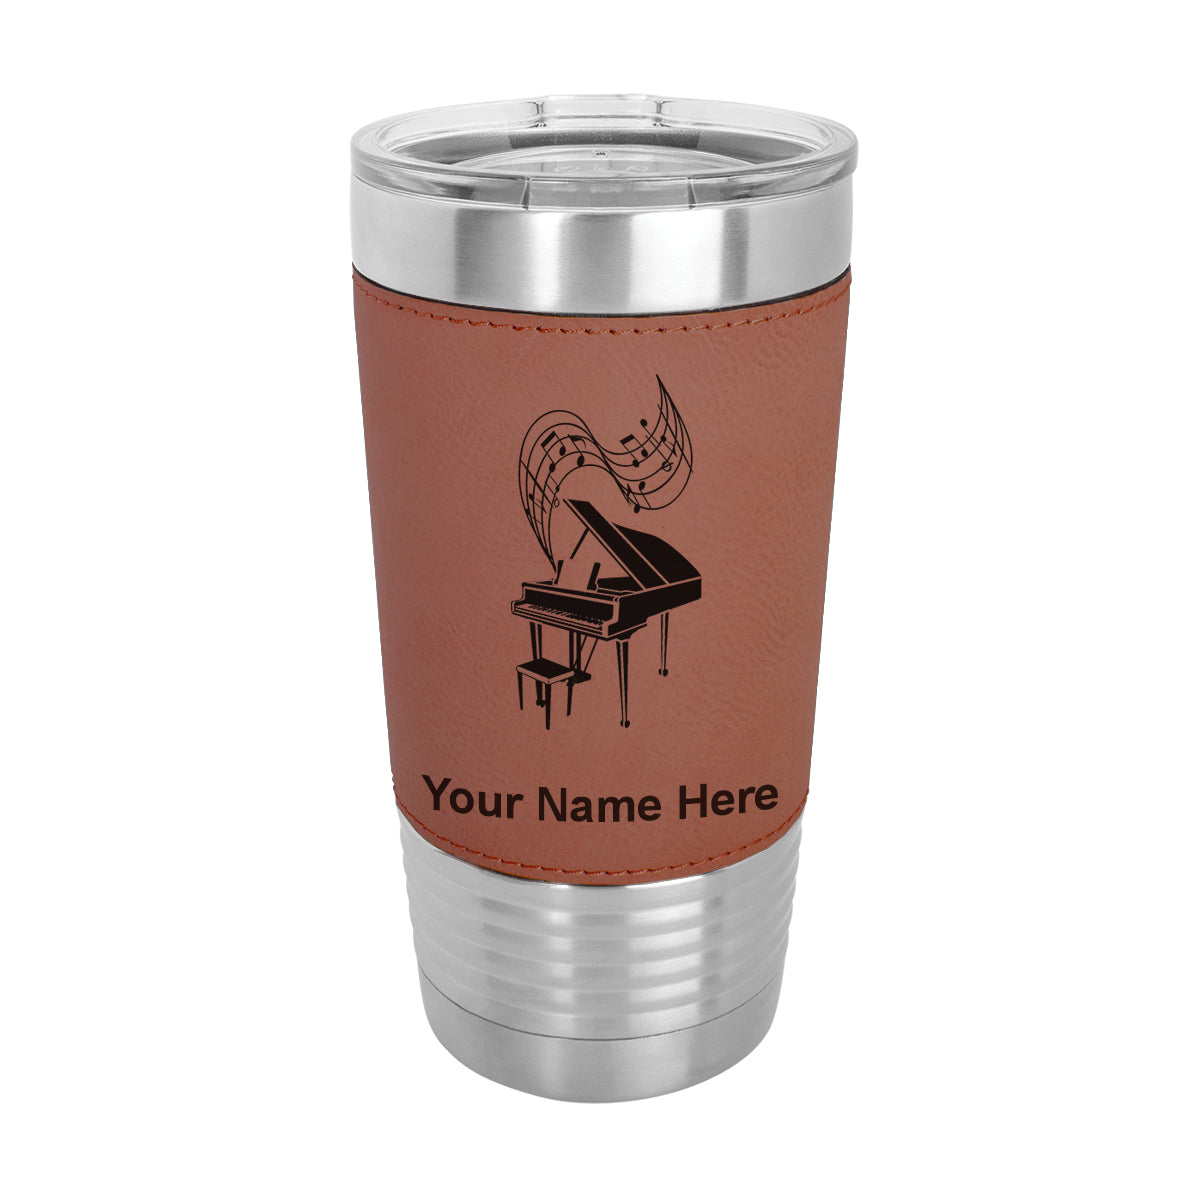 20oz Faux Leather Tumbler Mug, Grand Piano, Personalized Engraving Included - LaserGram Custom Engraved Gifts